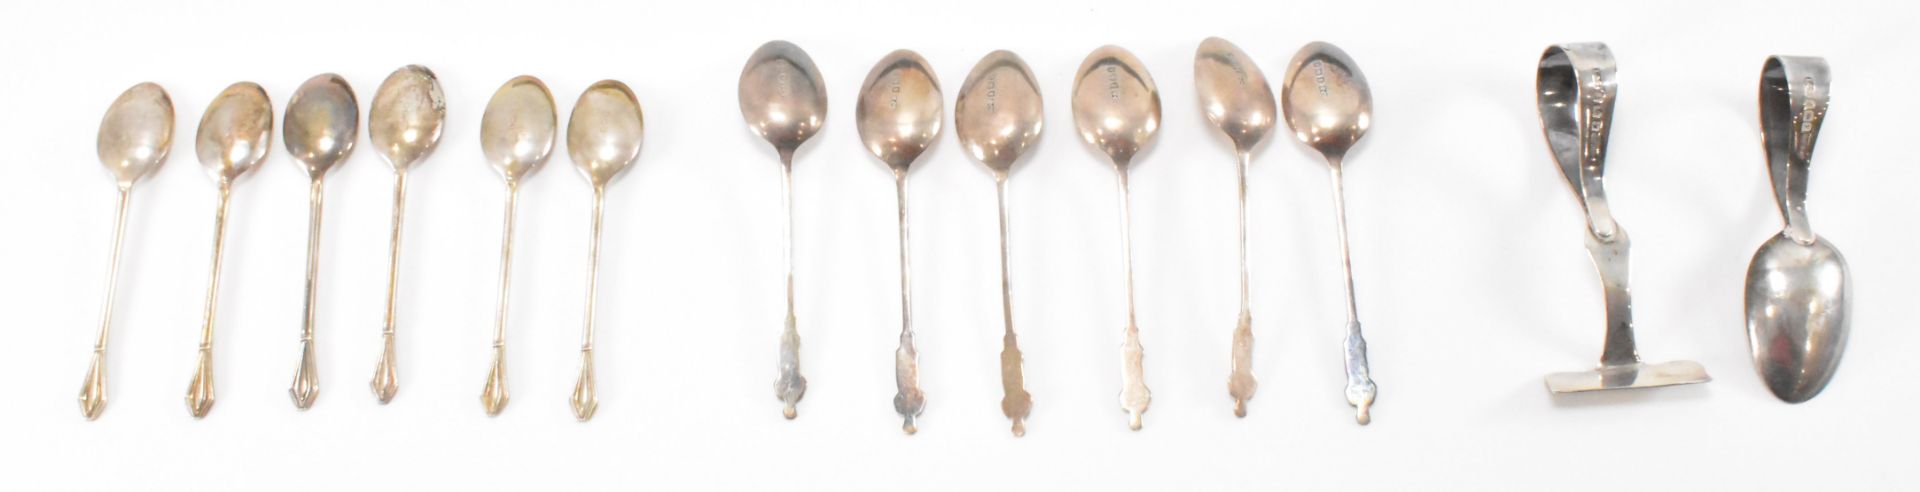 HALLMARKED SILVER TEAPSOONS WITH BABY SPOON & PUSHER - Image 3 of 7